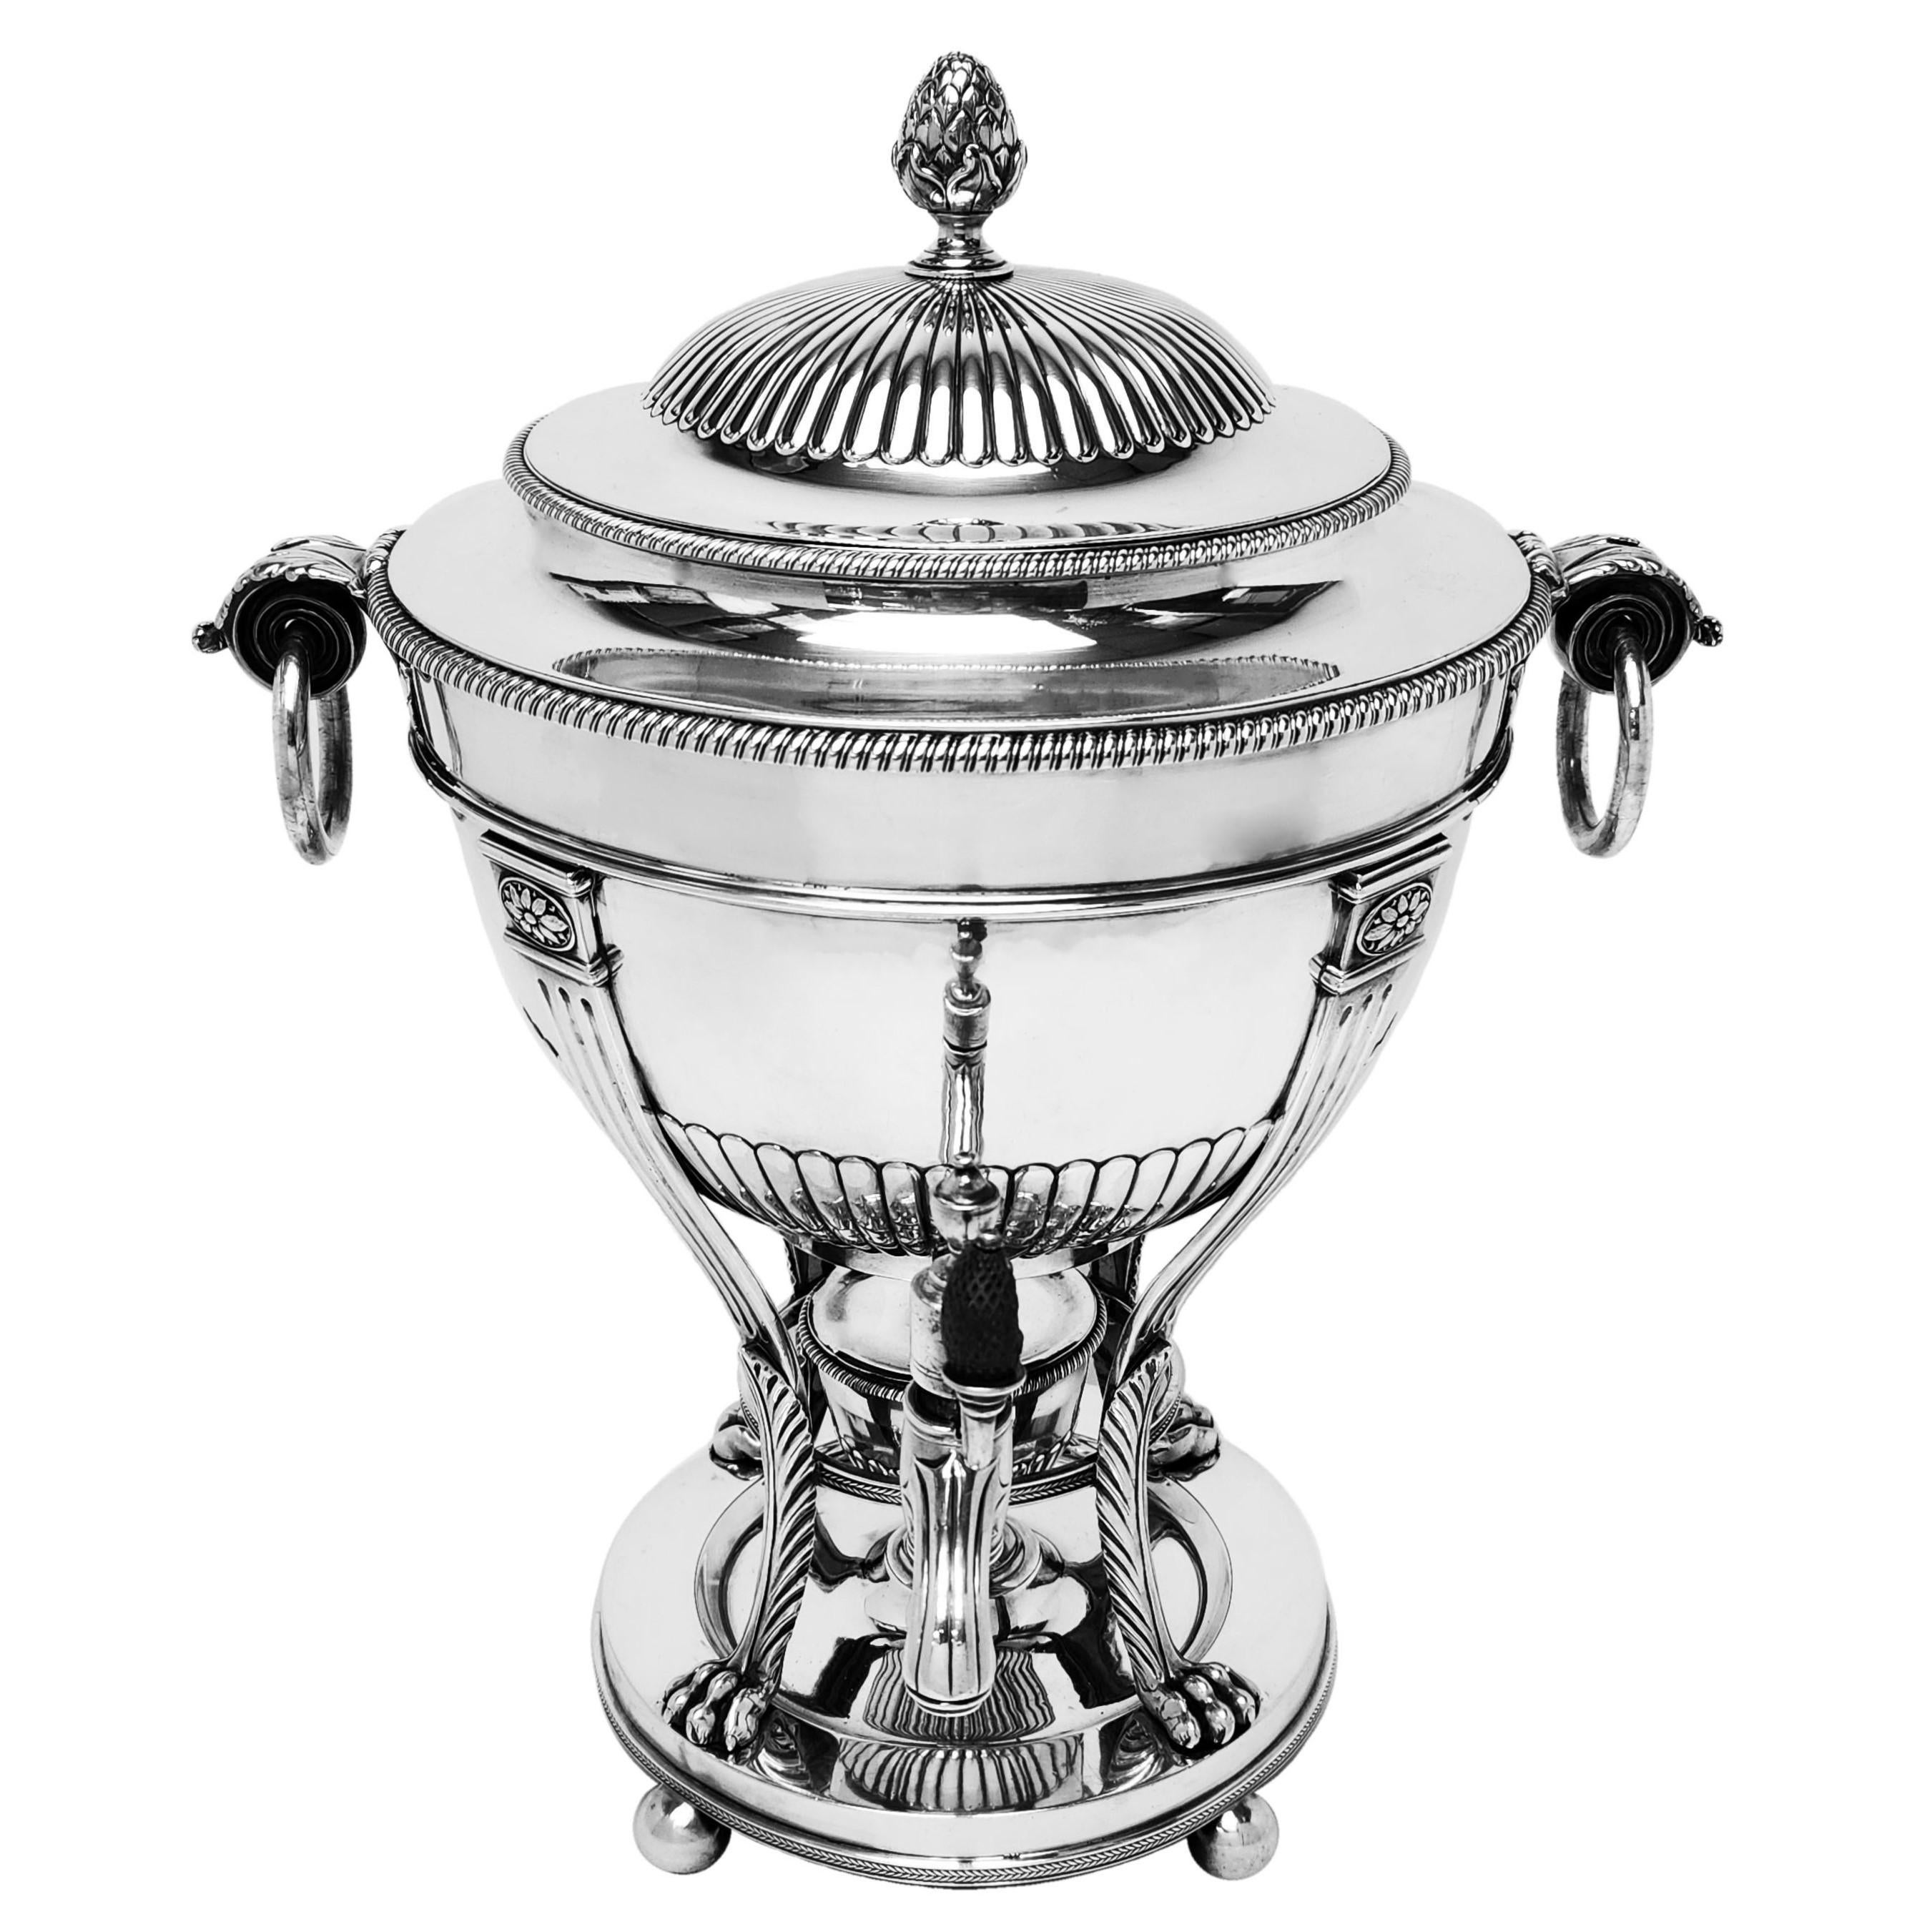 A magnificent Antique George III Sterling Silver Samovar by esteemed silversmith Paul Storr. This Georgian Tea Urn boasts many design elements typical of Storrs classical style. The round Urn is supported on 4 leaf topped lion paw feet and the body